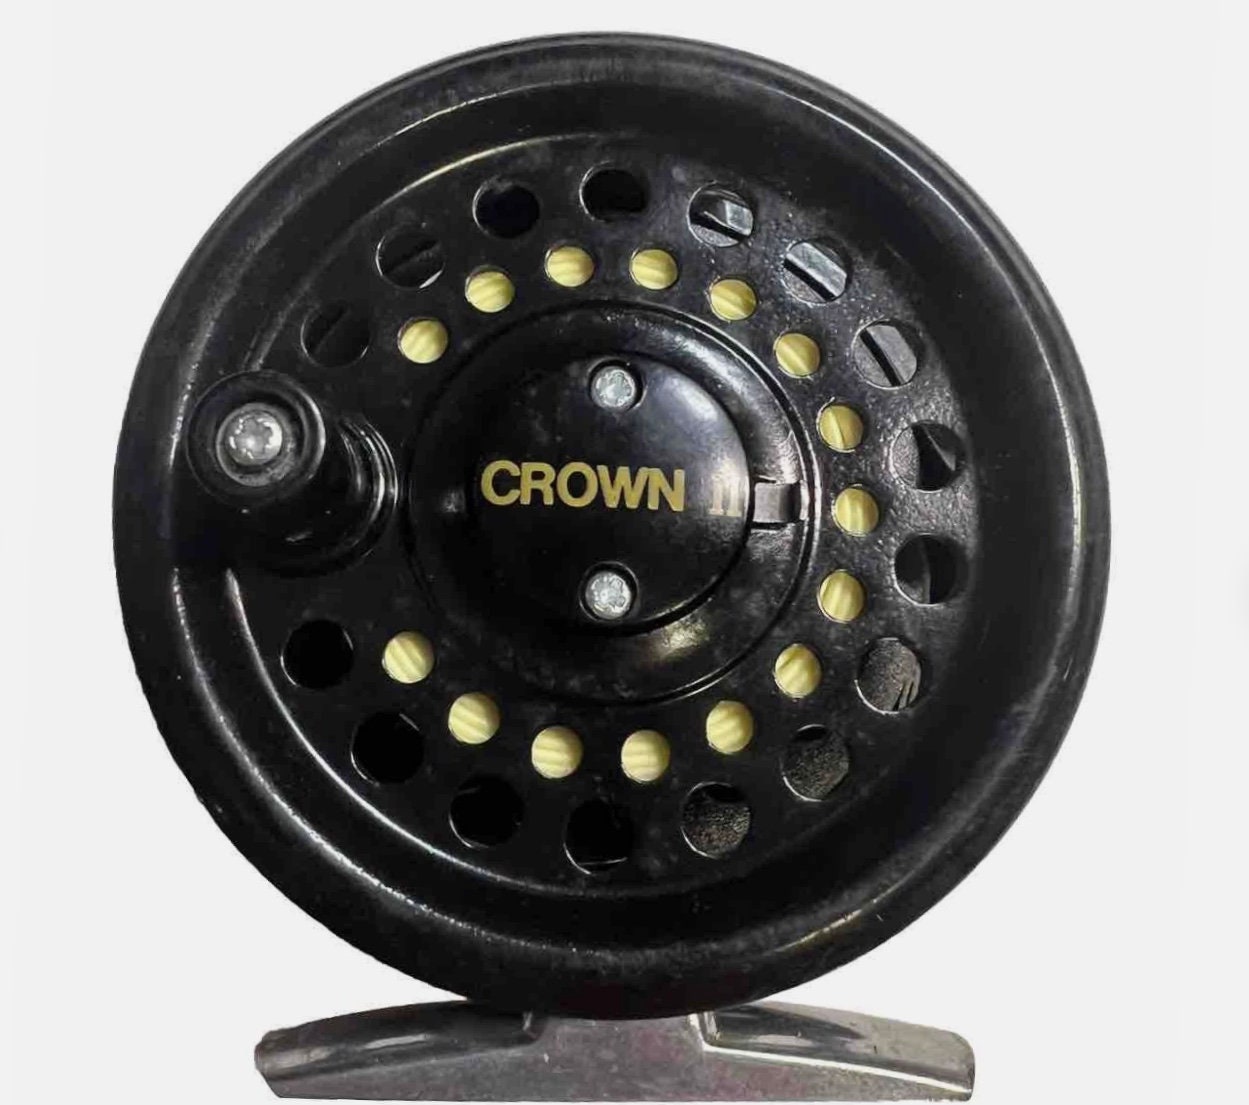 Pre-owned Cortland Small 40 Yard Crown Ll Fly Reel With Line and